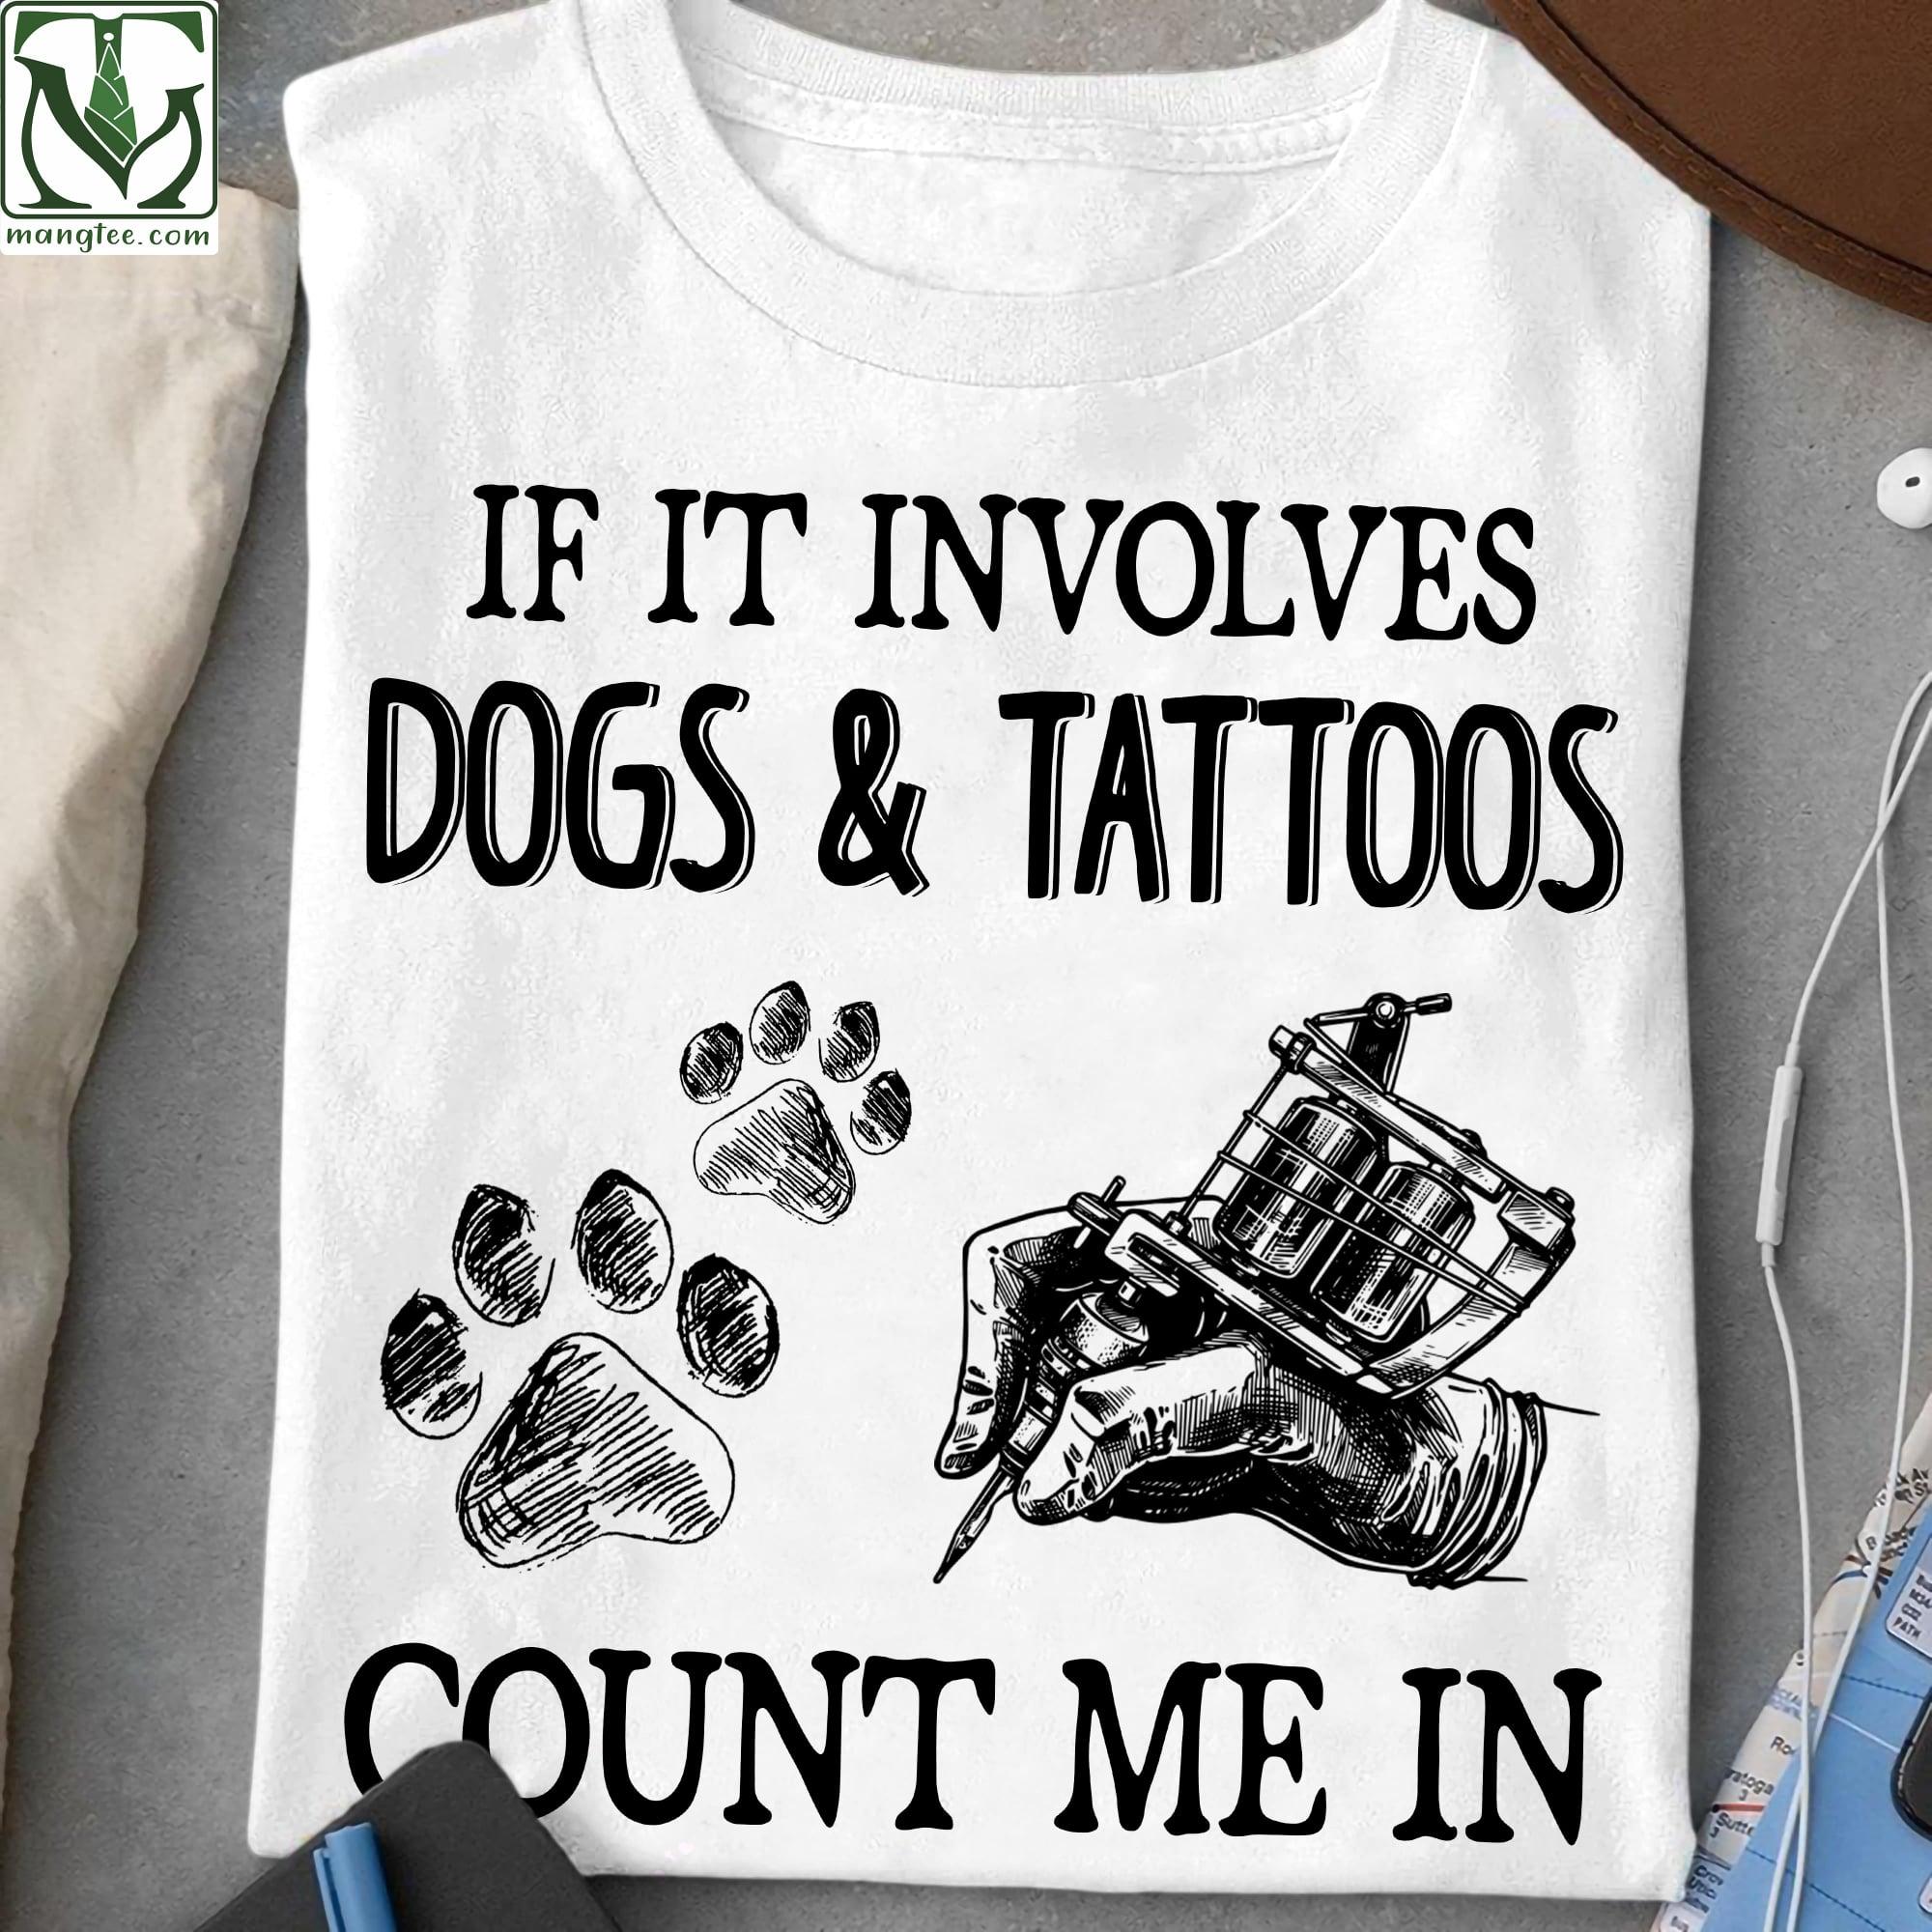 Dog Tattoos - If it involves dogs and tattoos count me in